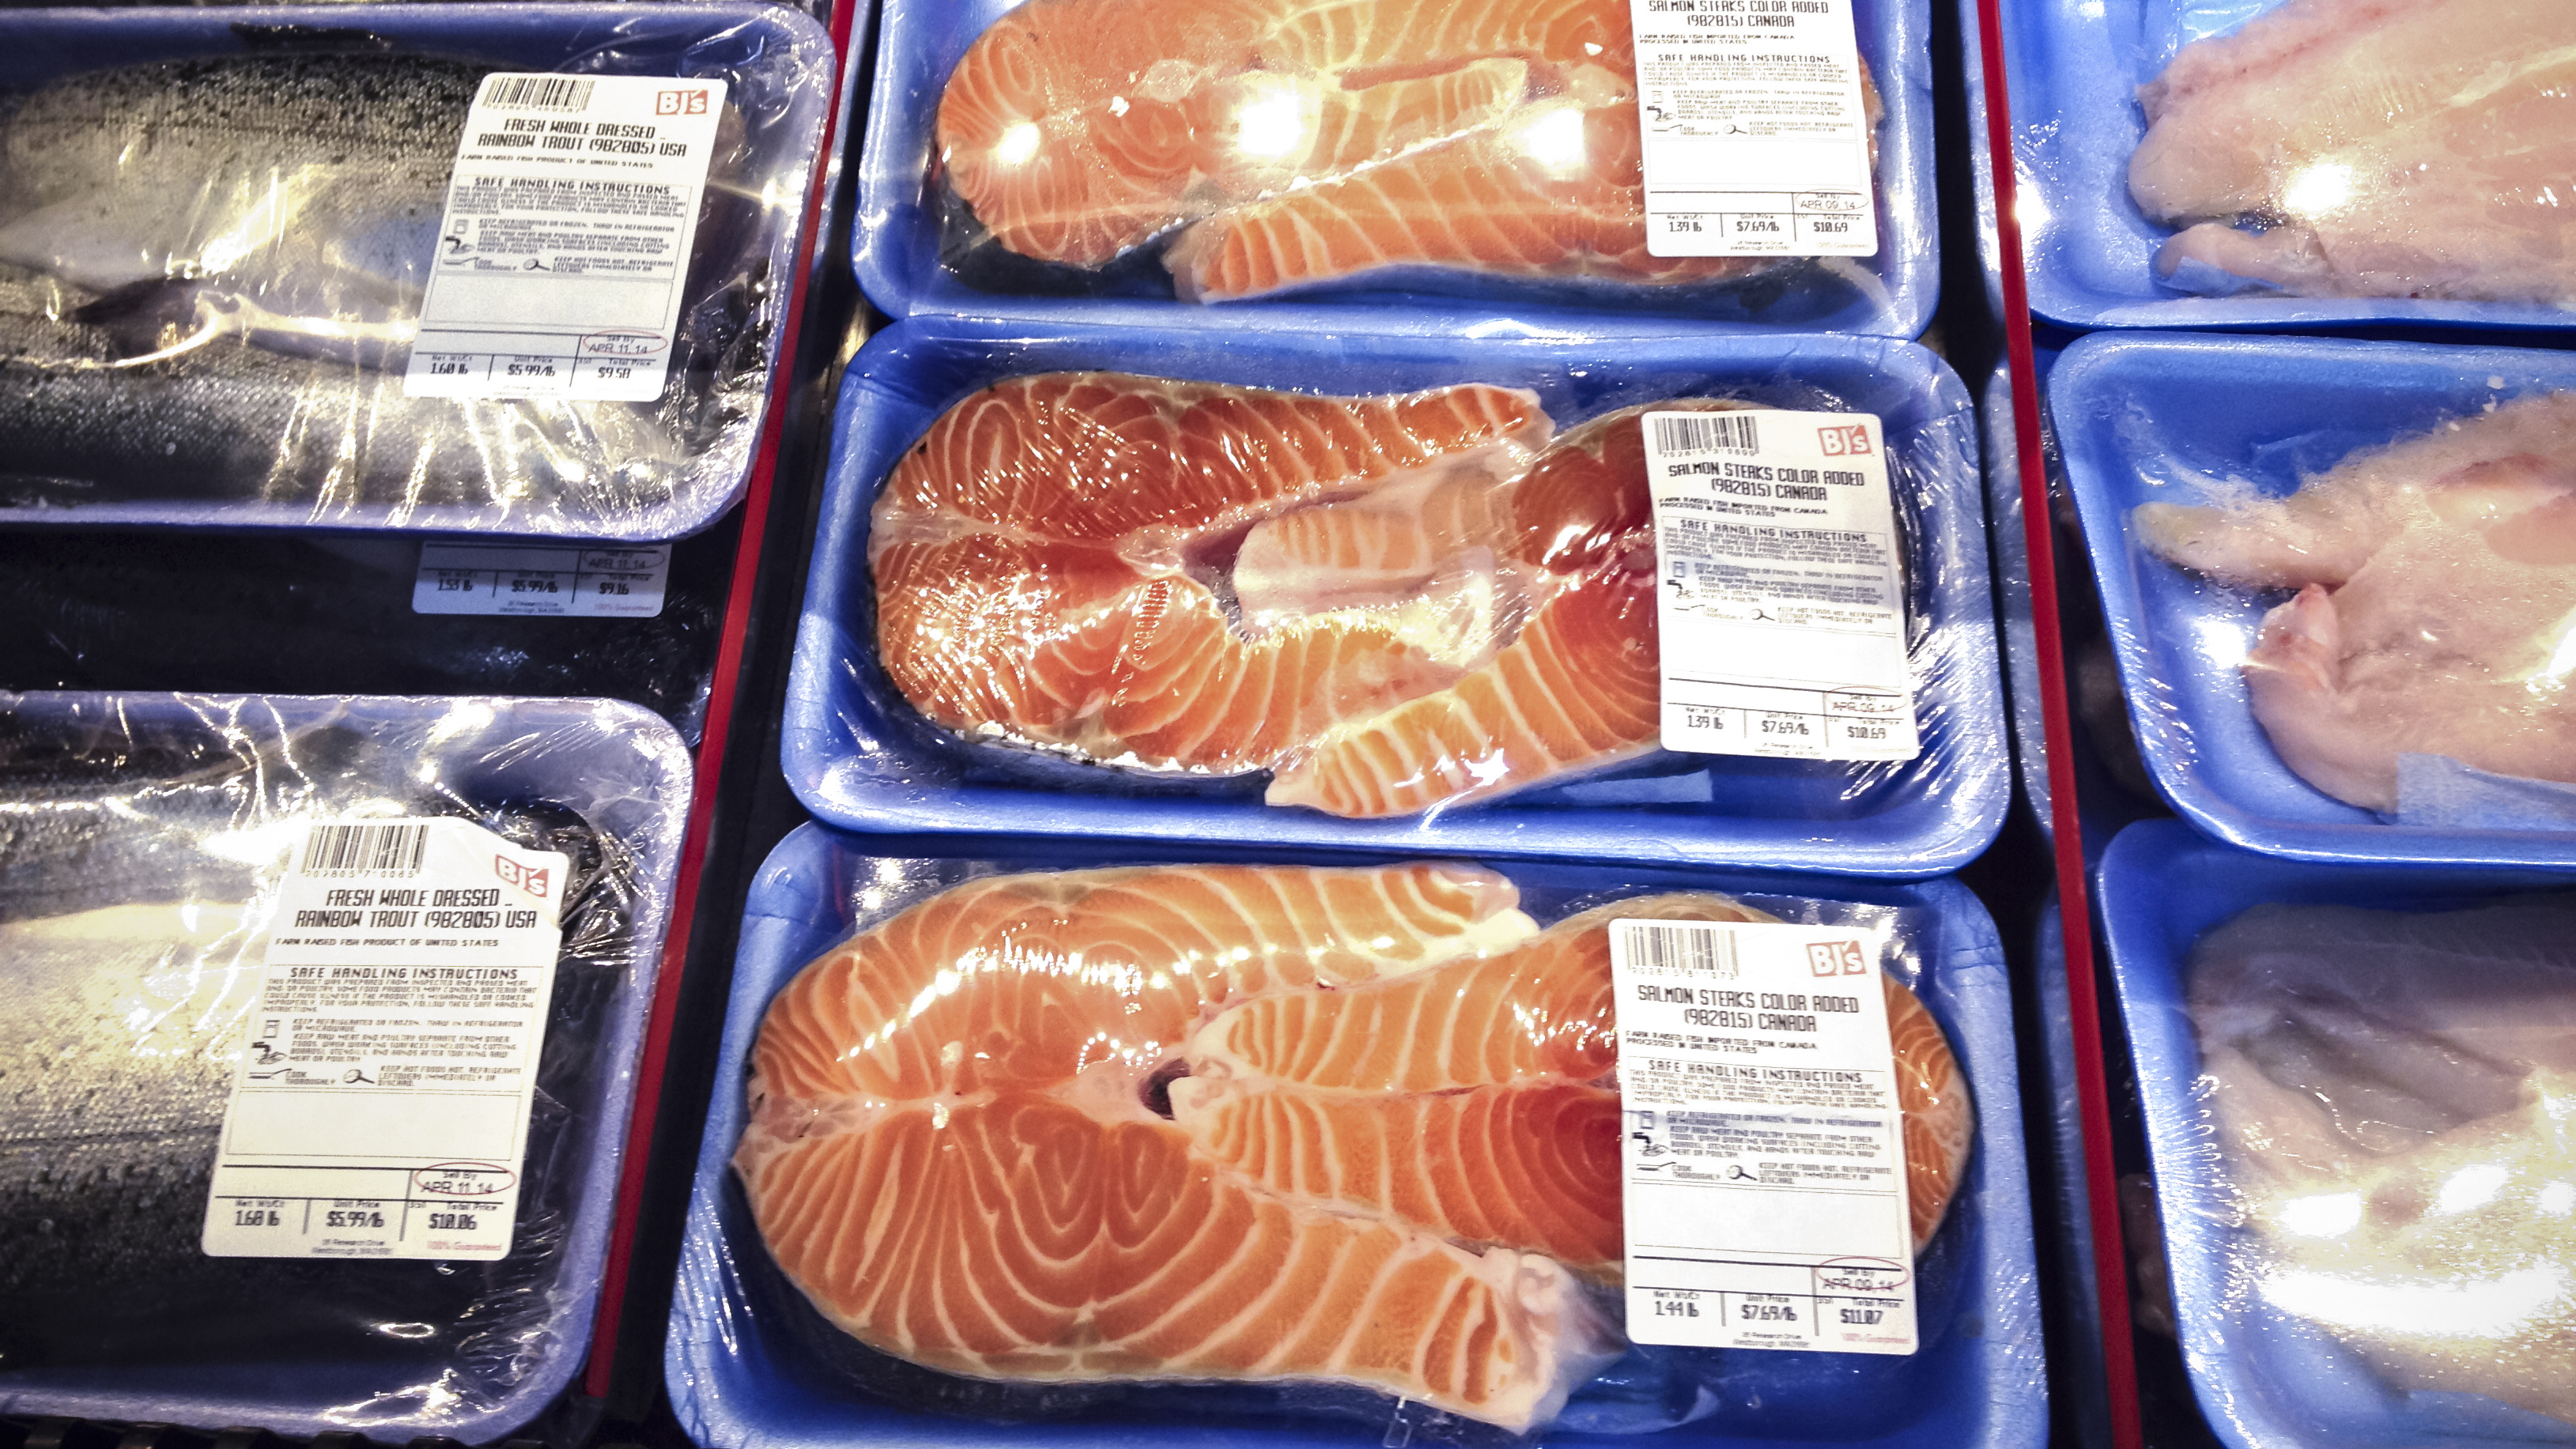 Paul Greenberg says the decline of local fish markets, and the resulting sequestration of seafood to a corner of our supermarkets, has contributed to "the facelessness and comodification of seafood." Photo: J. Scott Applewhite/AP